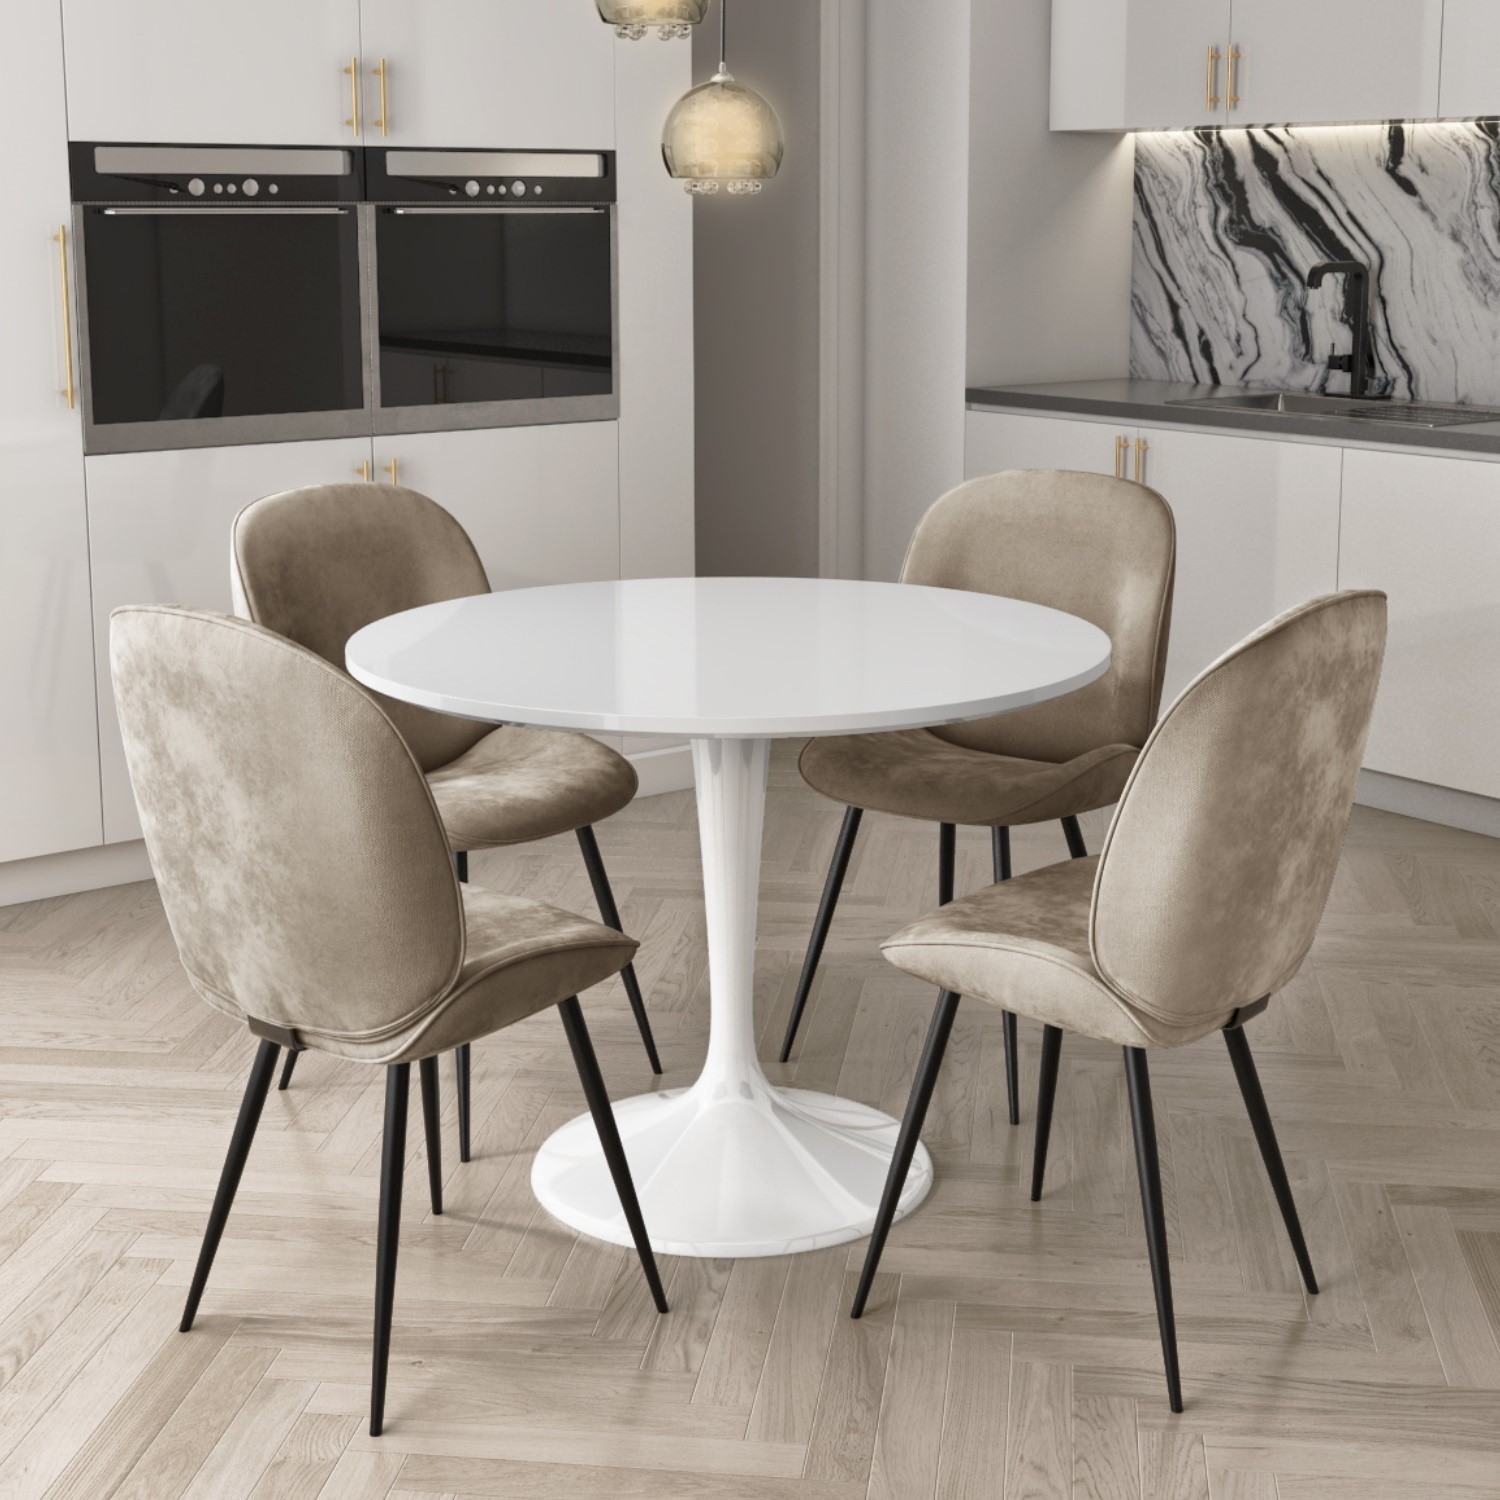 White Round High Gloss Dining Table, White Gloss Round Dining Table And 4 Chairs